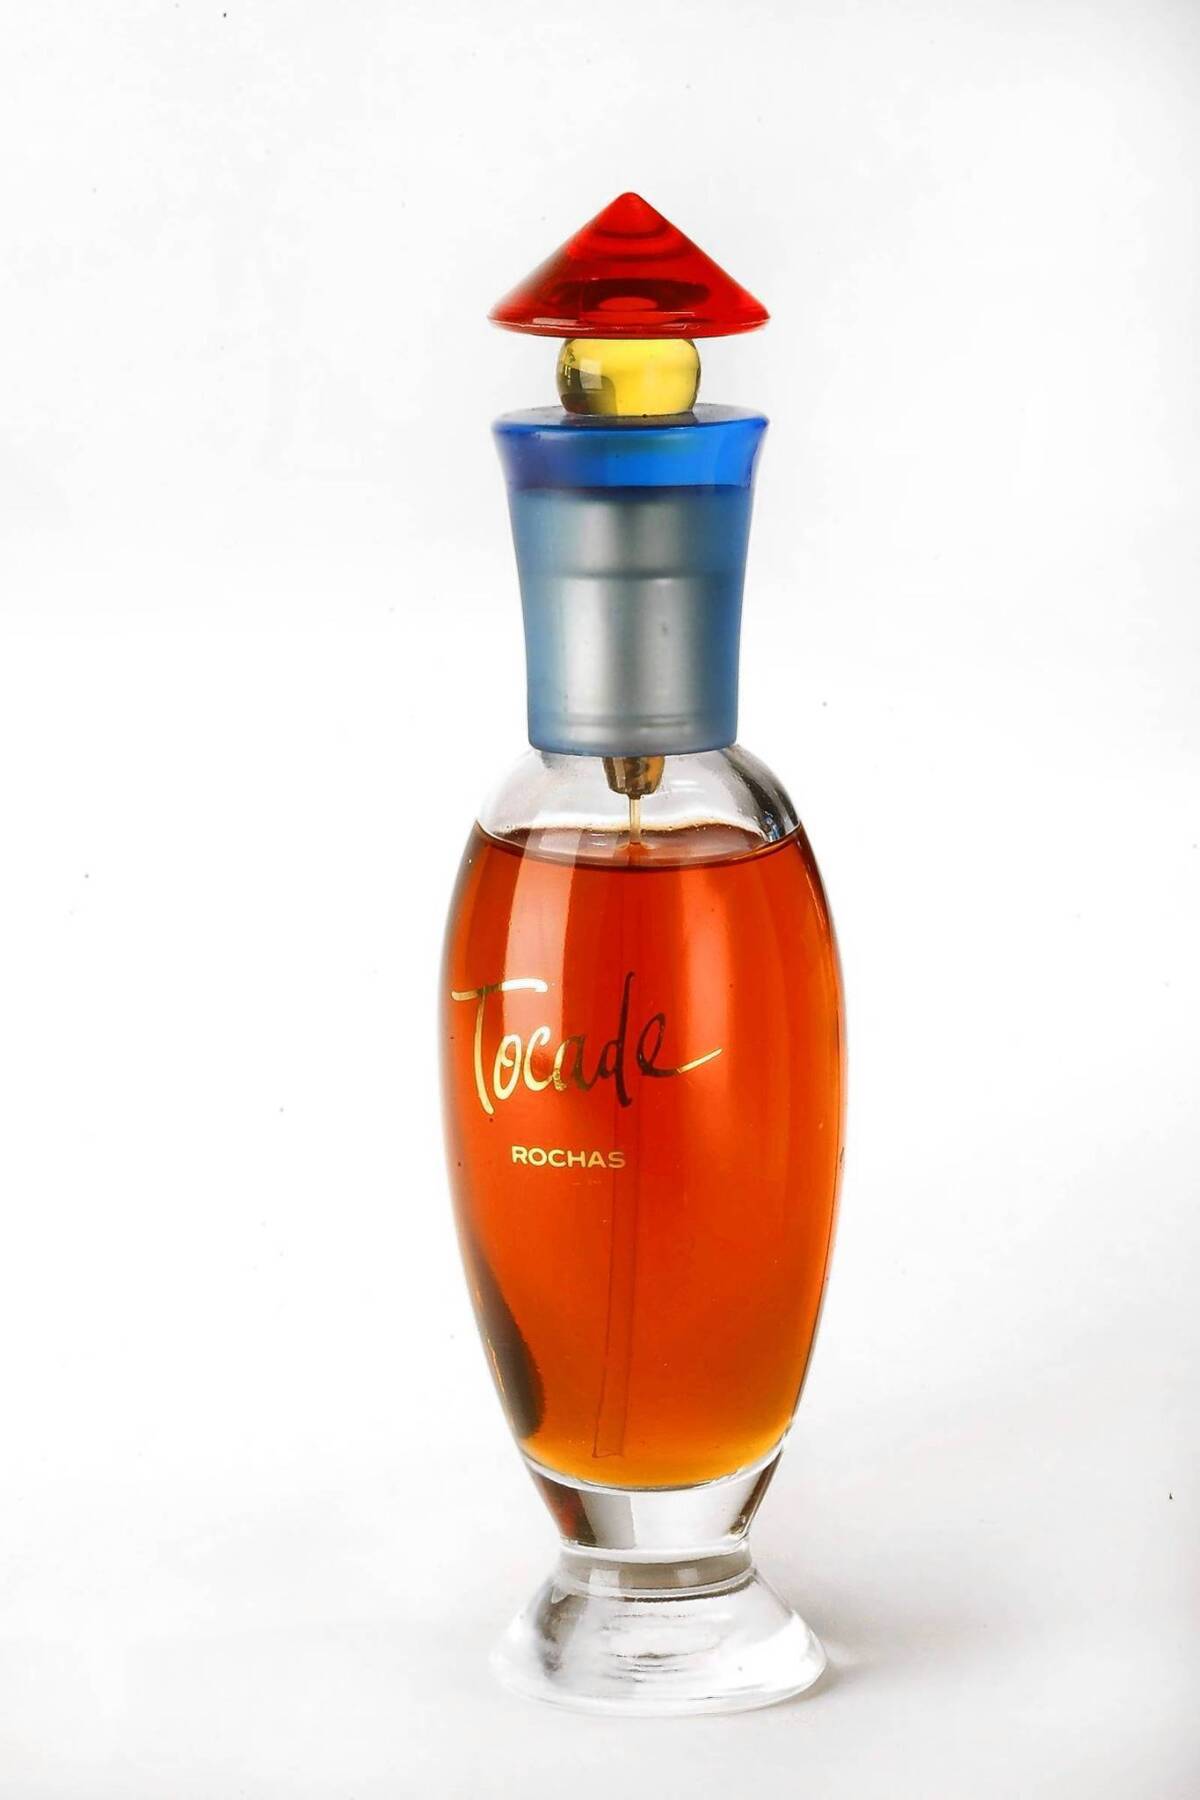 Rochas Tocade has a vanilla rose scent and comes in a whimsical bottle.